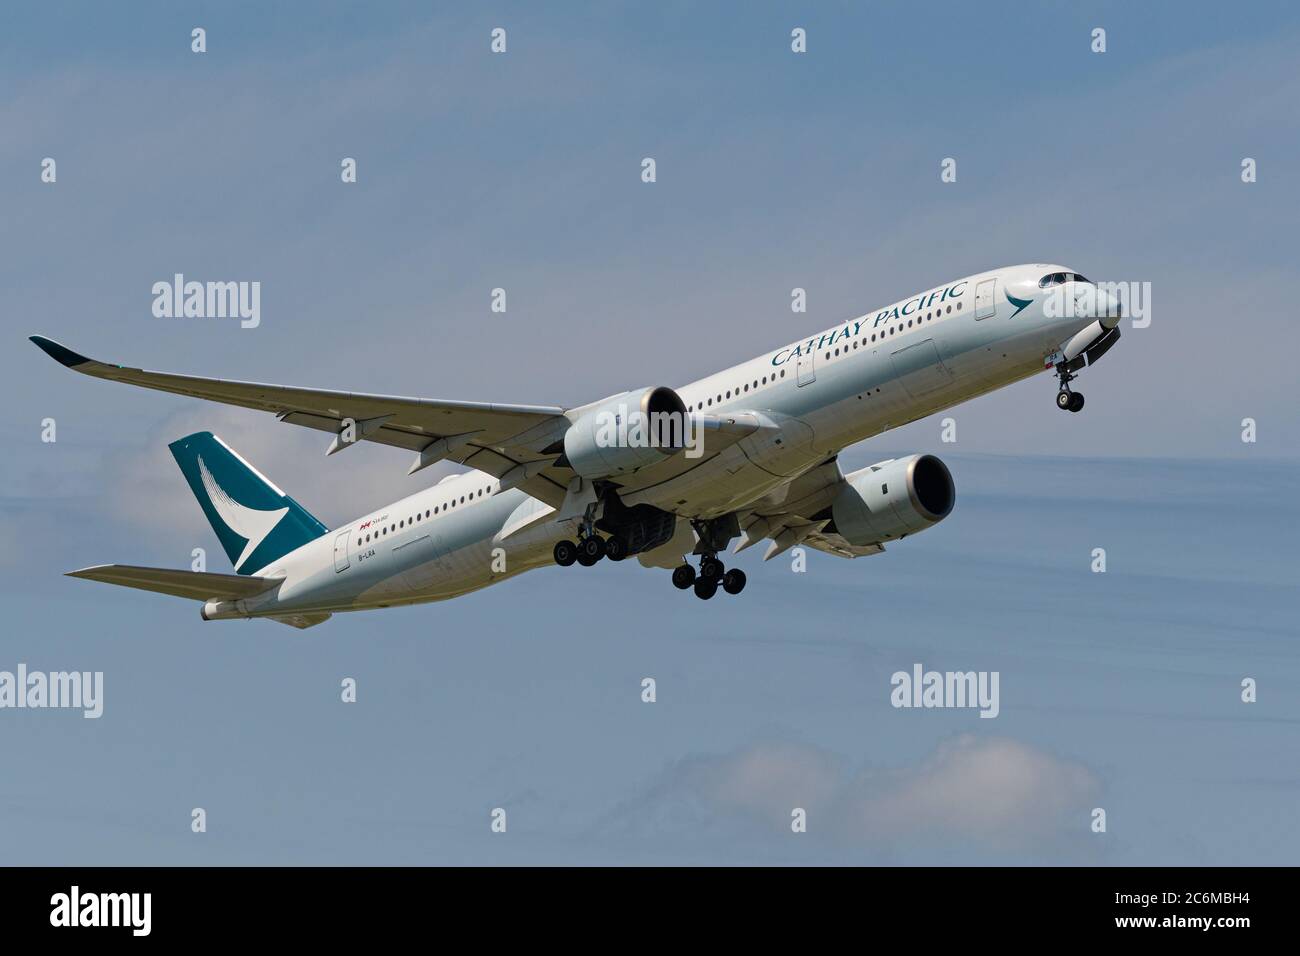 Richmond, British Columbia, Canada. 10th July, 2020. A Cathay Pacific Airways Airbus A350-900 (B-LRA) wide-body jet takes off from Vancouver International Airport on a flight from Vancouver to Hong Kong, July 10, 2020. Credit: Bayne Stanley/ZUMA Wire/Alamy Live News Stock Photo